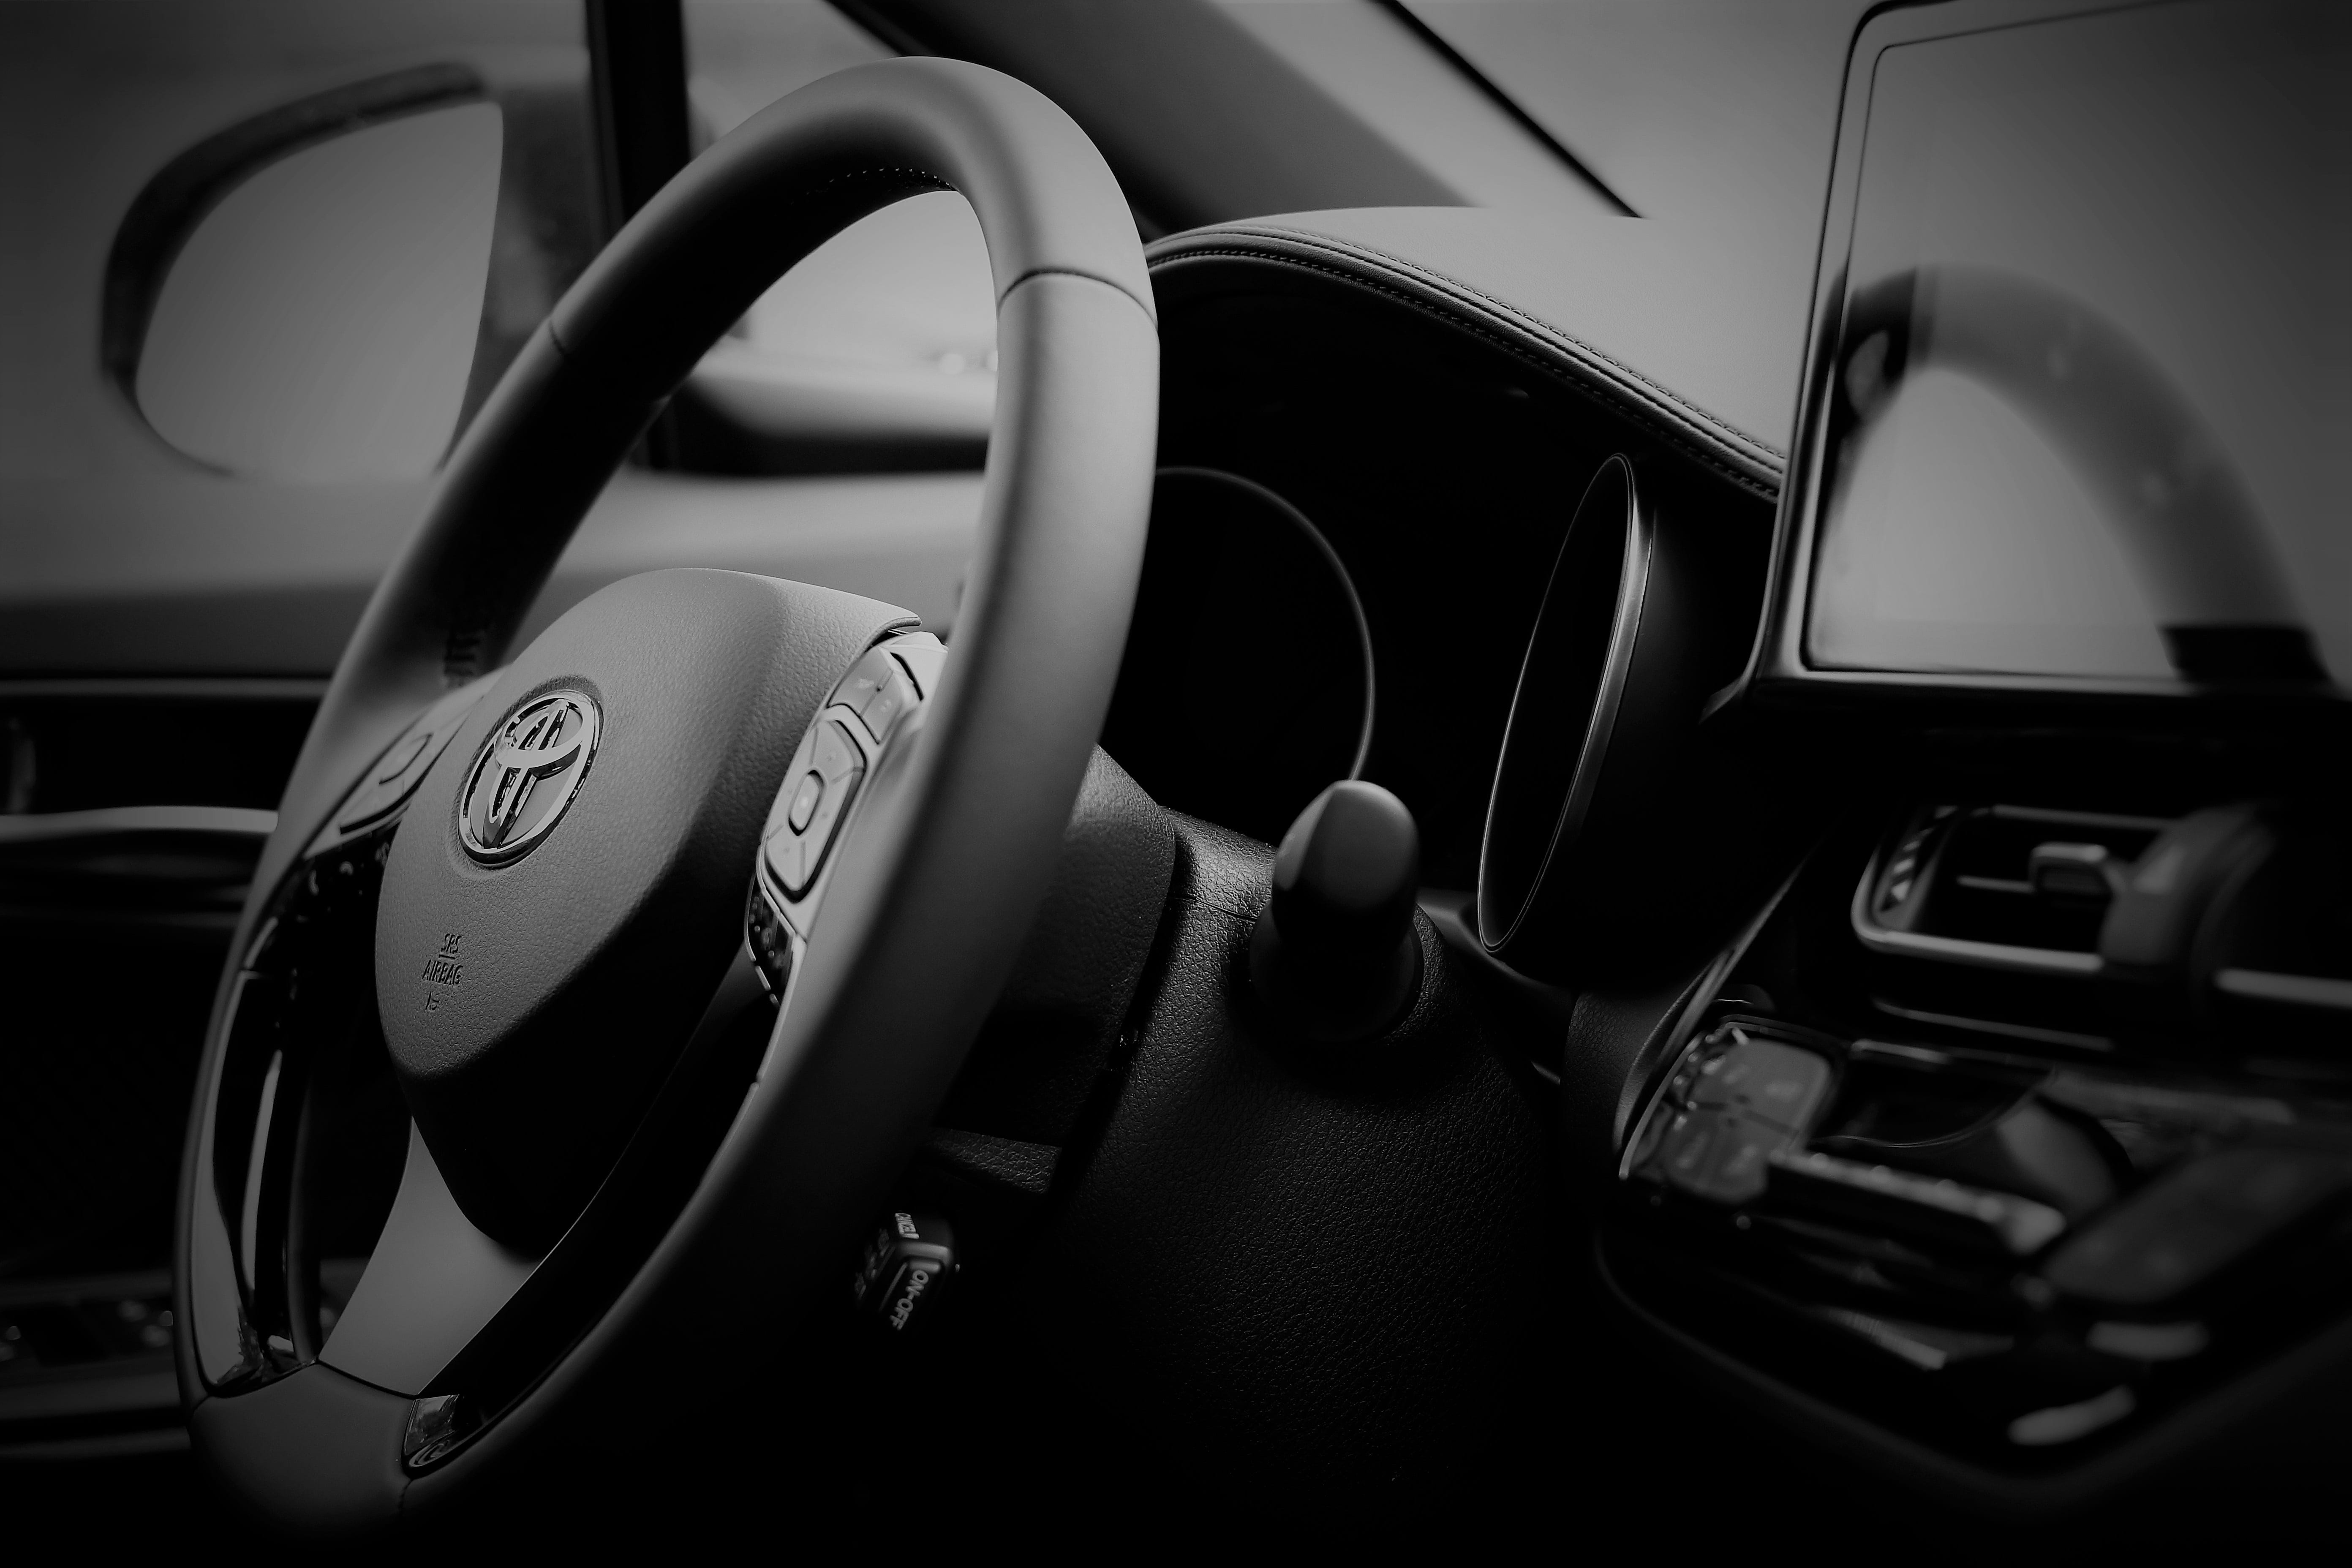 grayscale photography of Toyota vehicle steering wheel, toyota c-hr